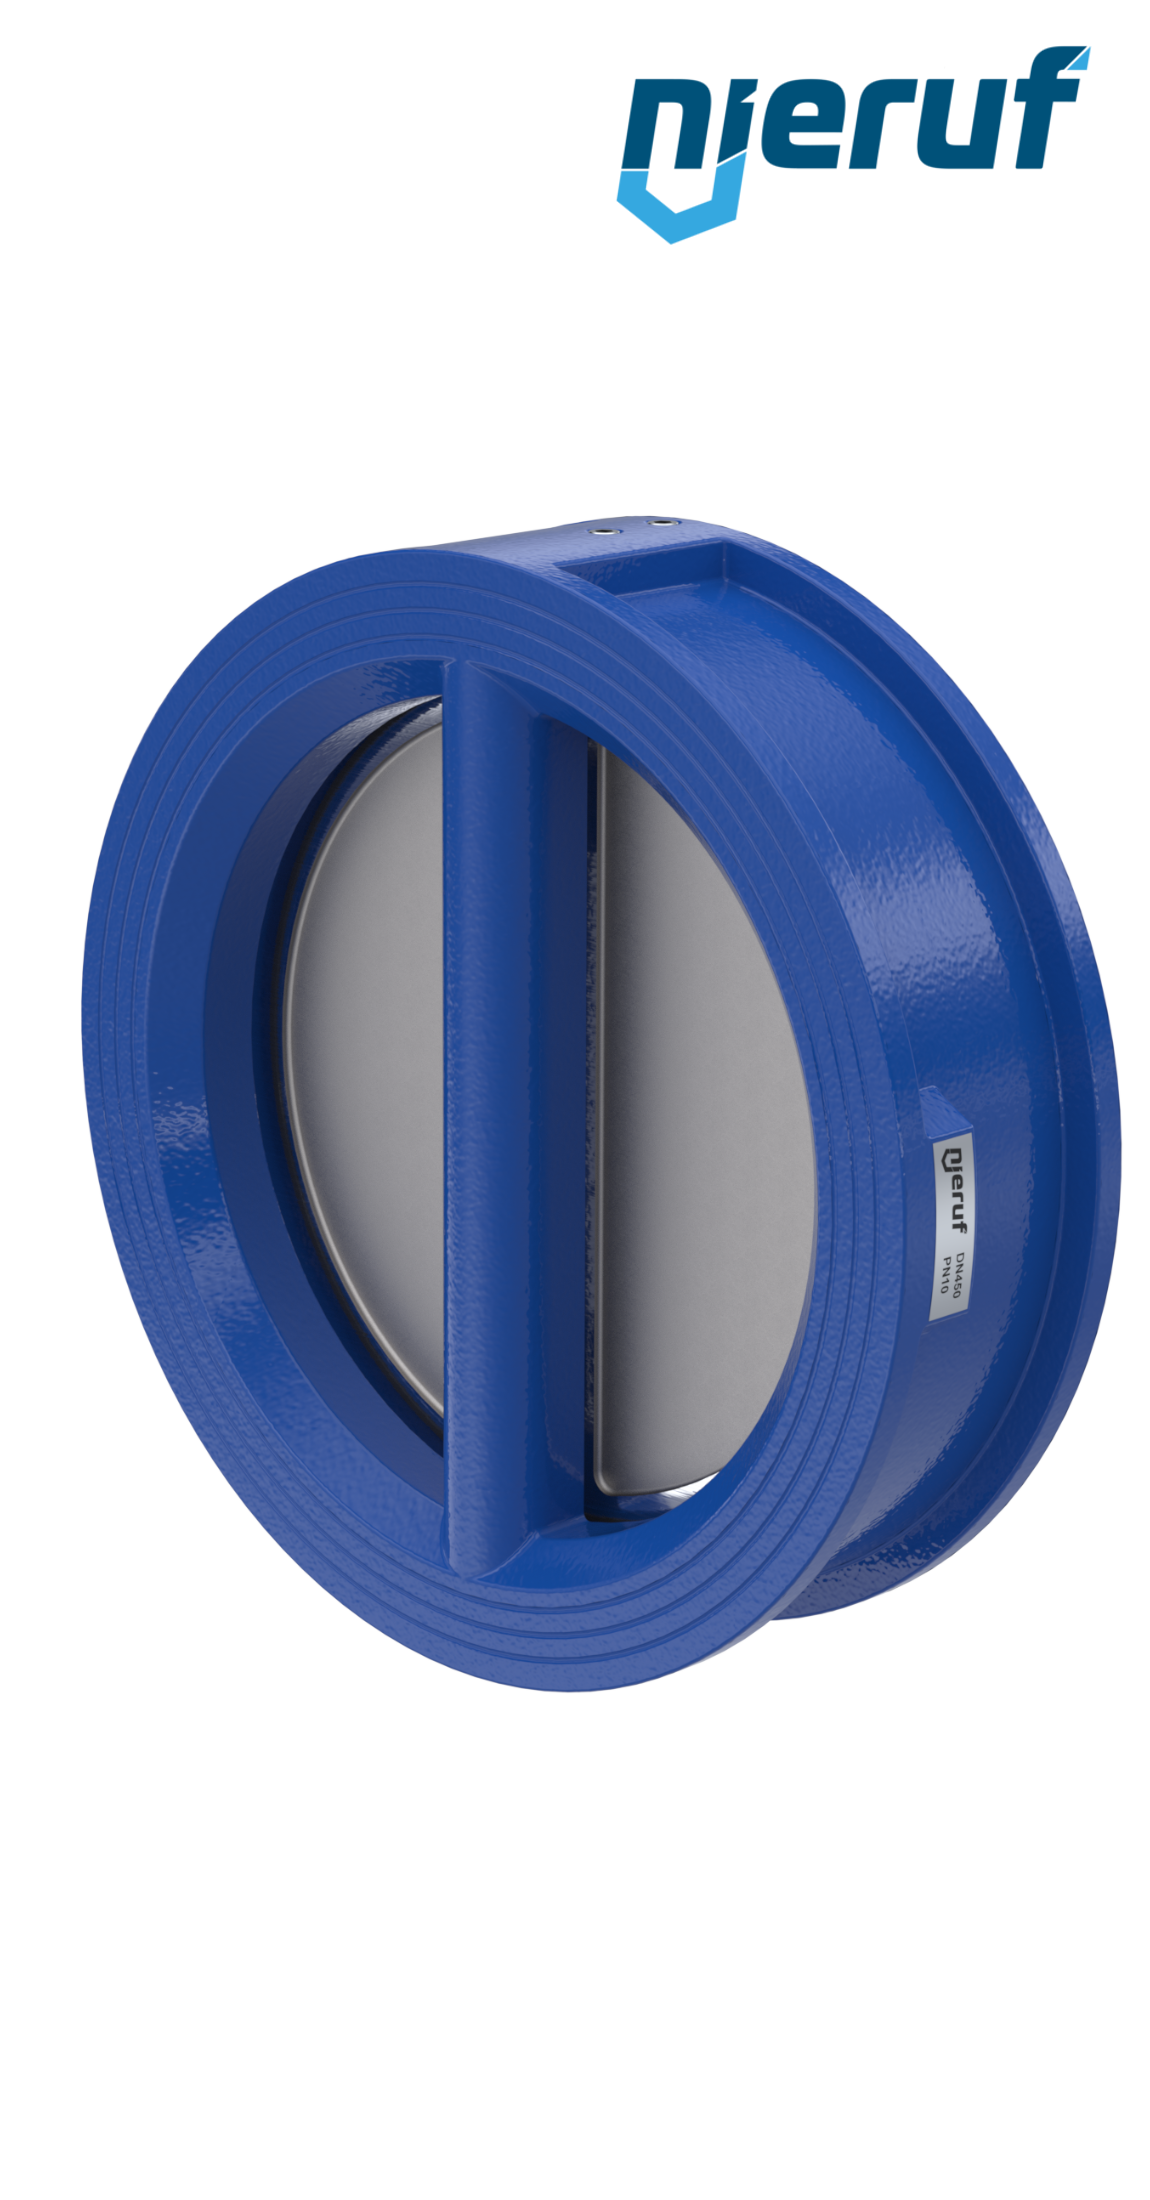 dual plate check valve DN450 DR01 GGG40 epoxyd plated blue 180µm NBR